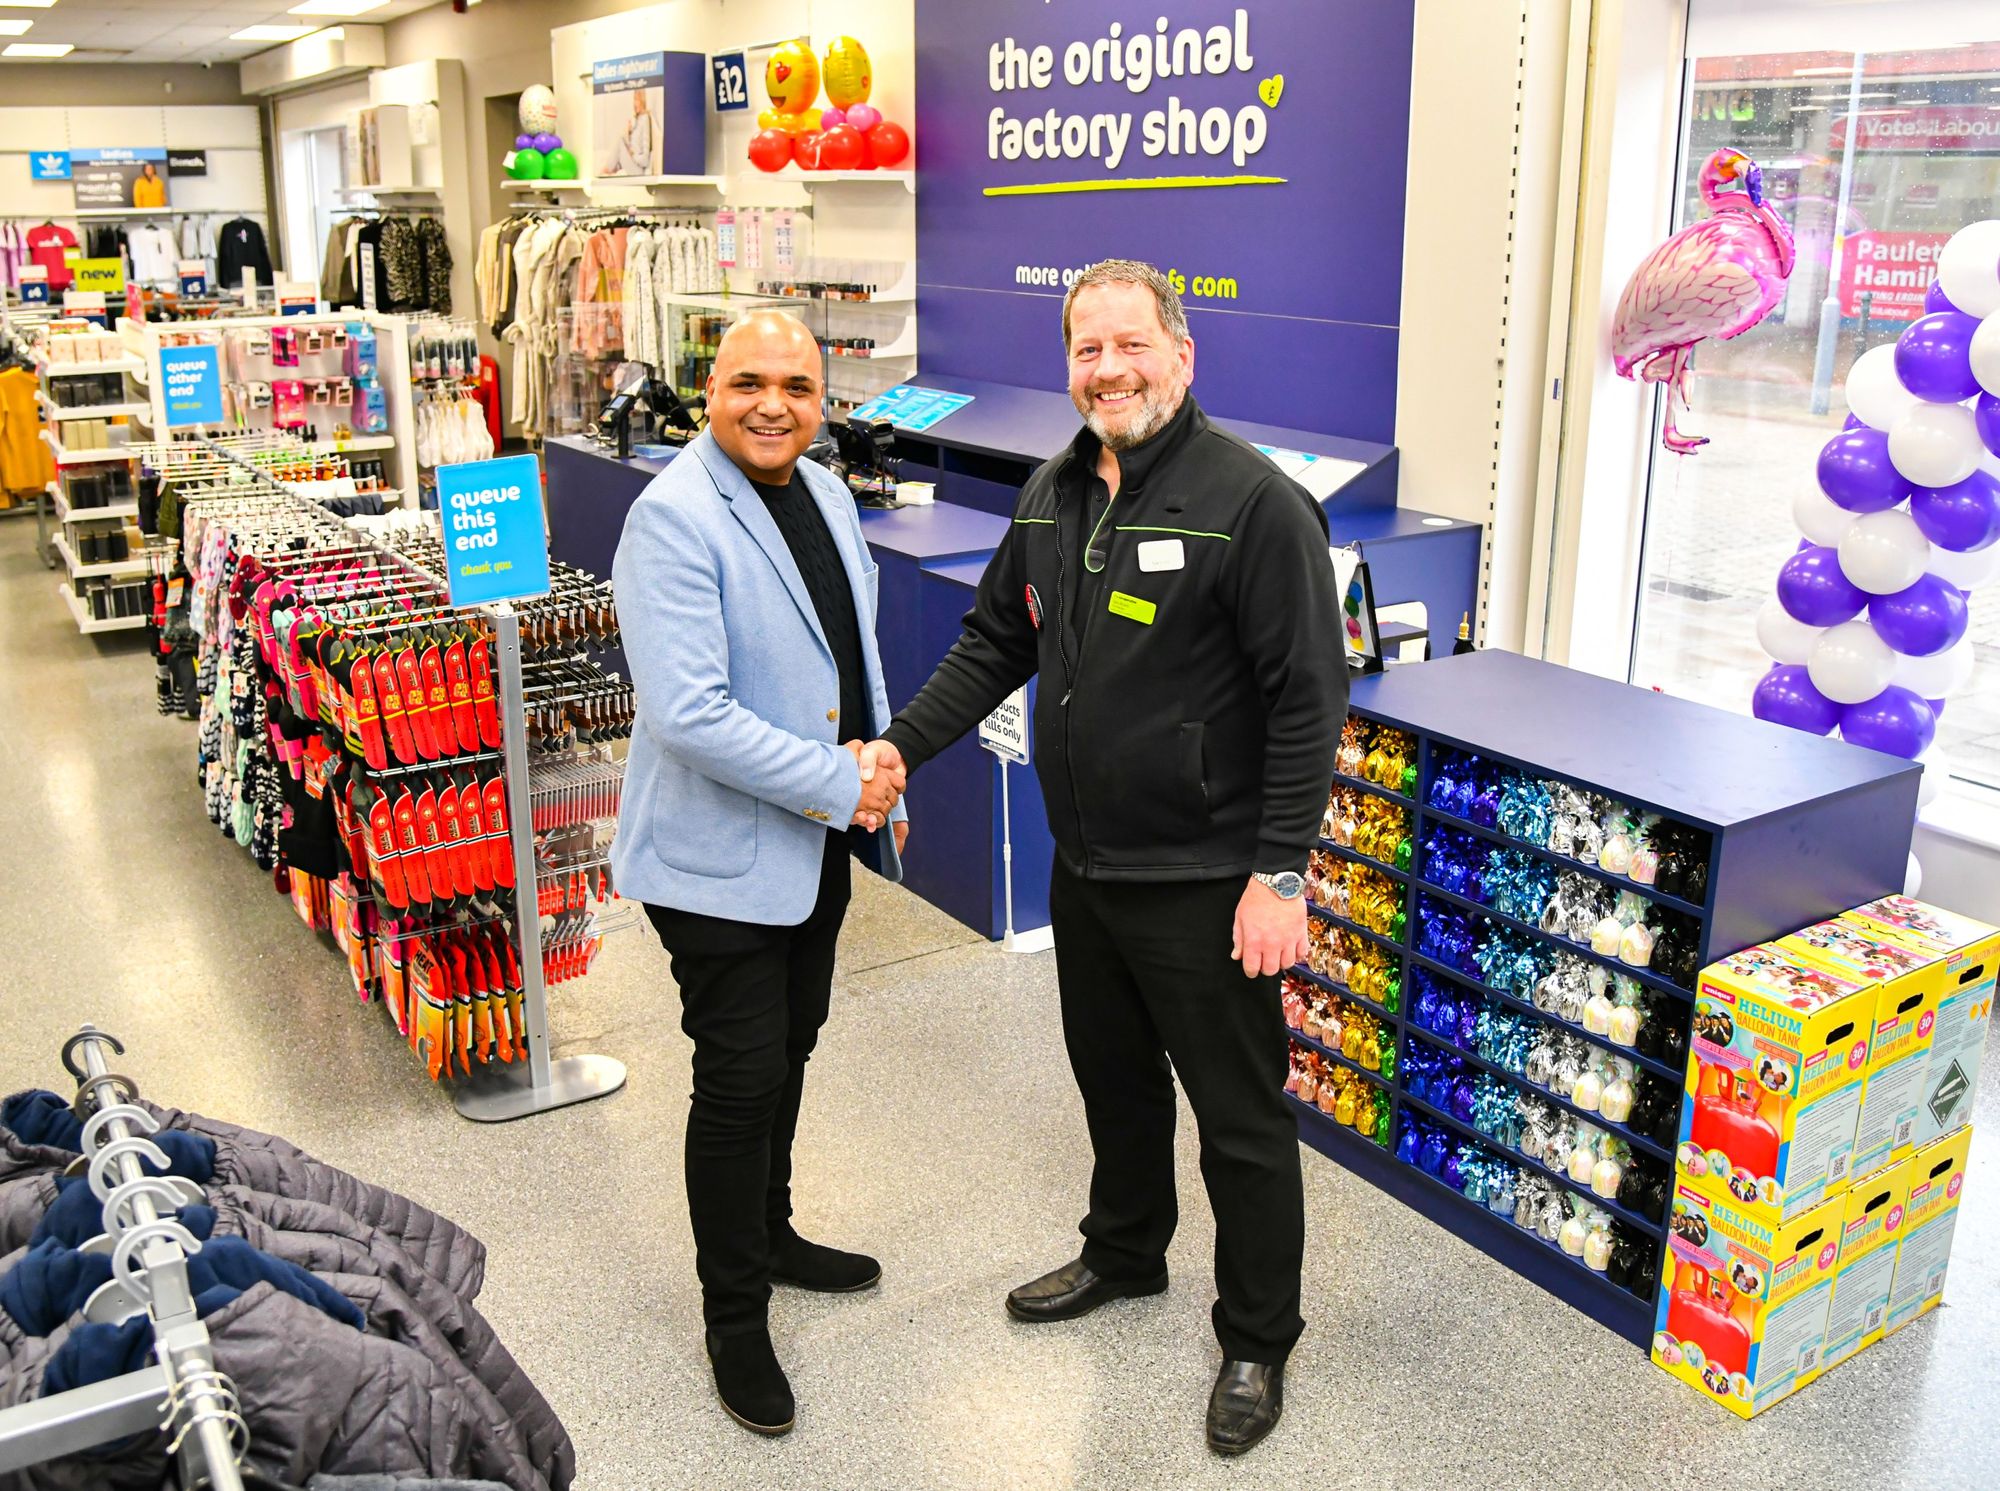 Central England Co-op partners with The Original Factory Shop in Erdington creating 10 new jobs